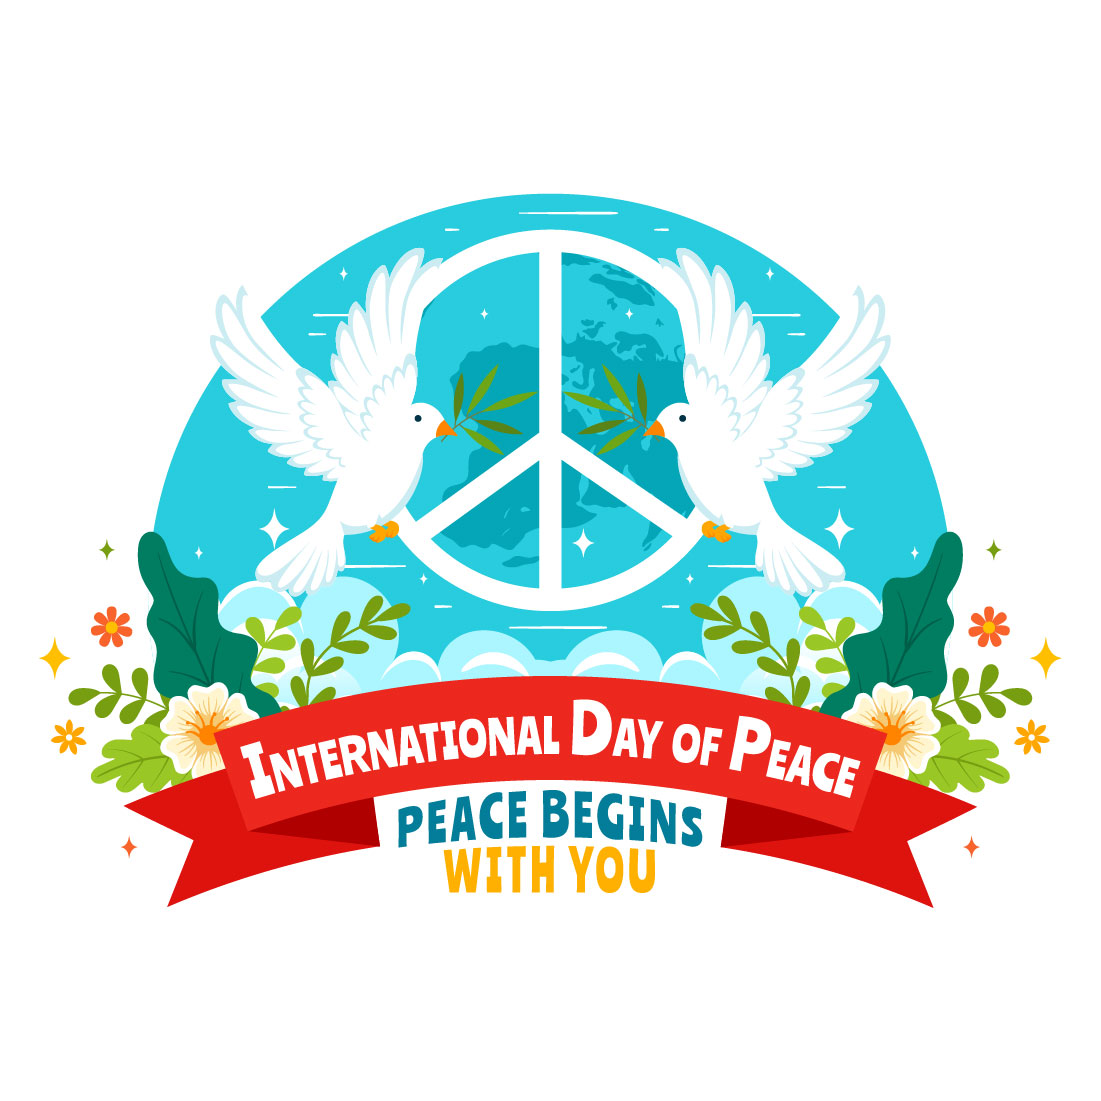 12 International Peace Day Illustration cover image.